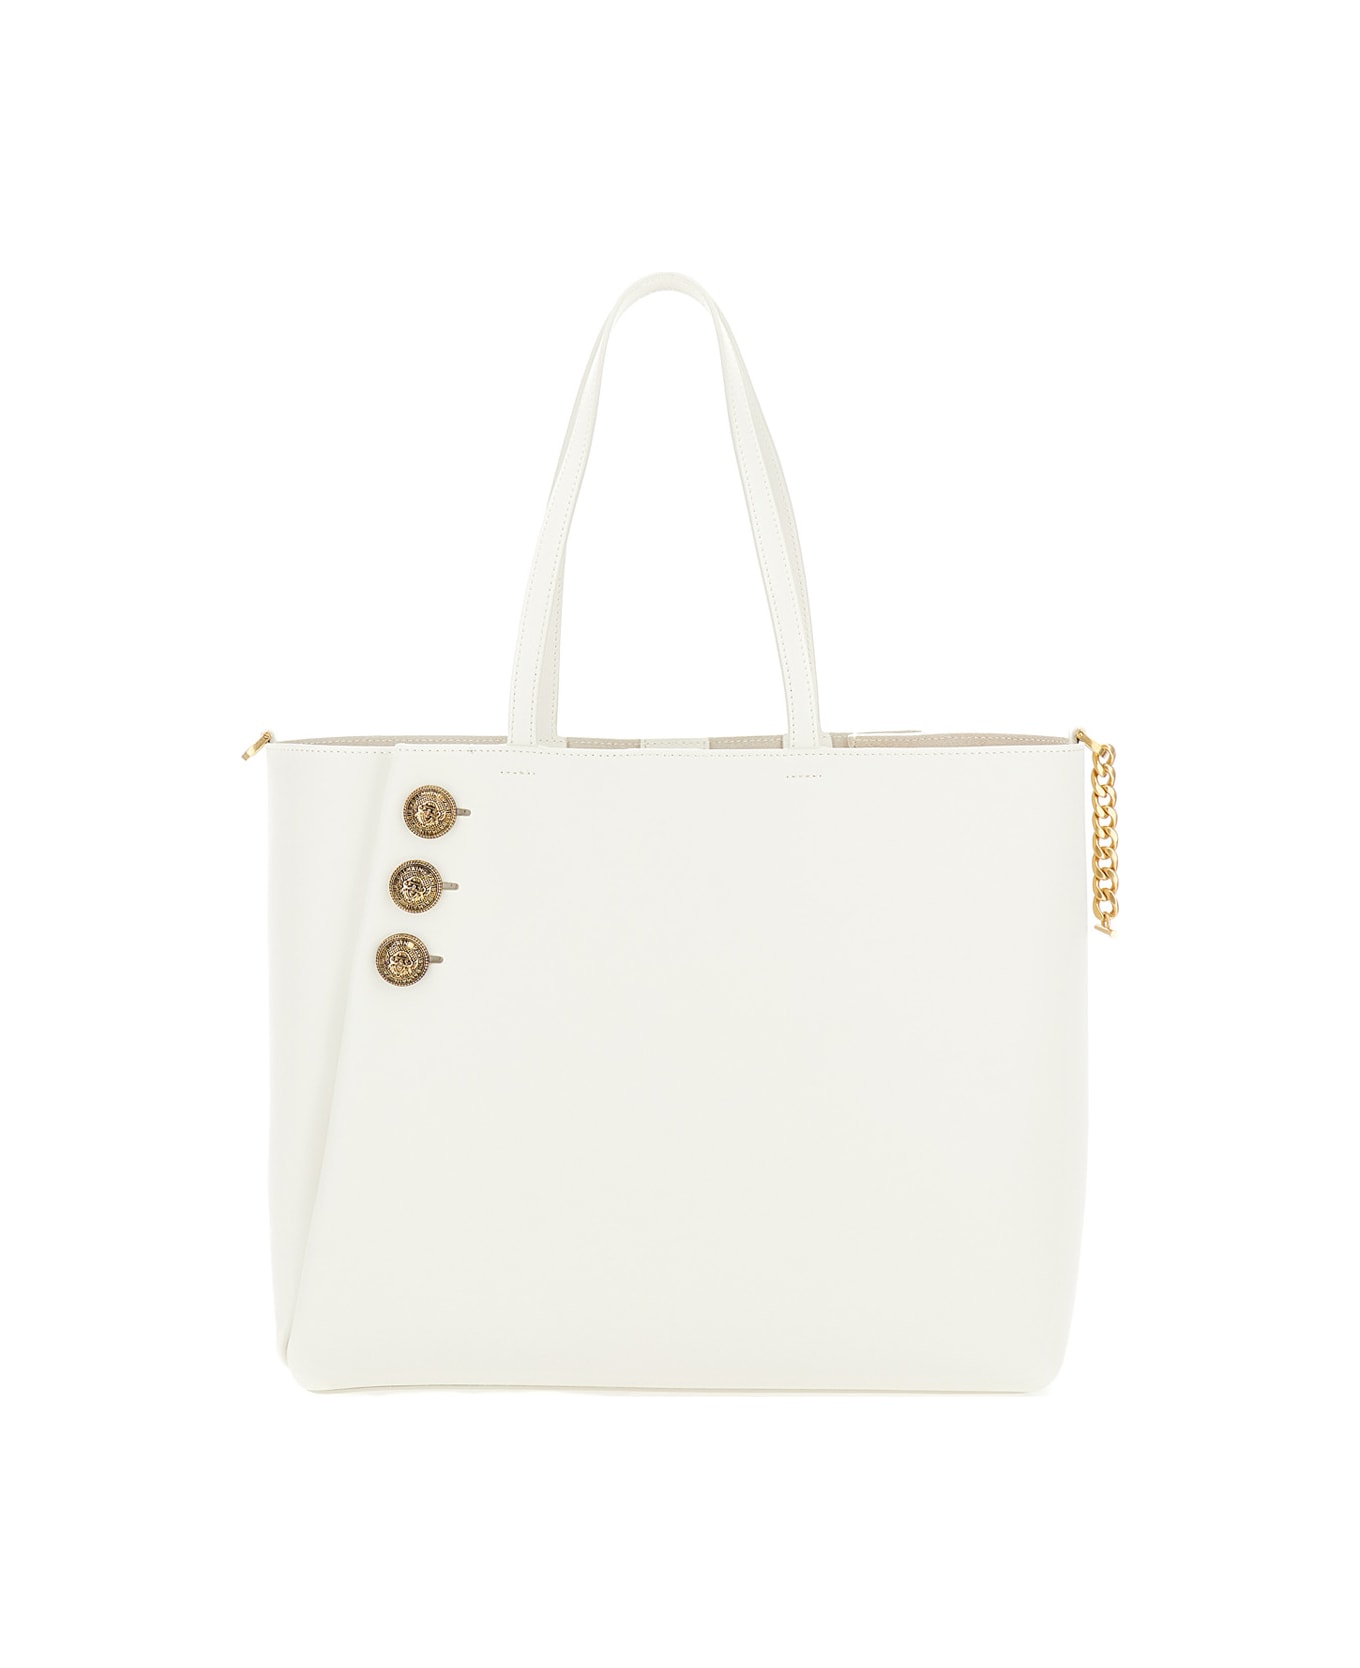 Balmain 'emblème' White Tote Bag With Balmain Coin Buttons And Logo Print In Smooth Leather Woman - White